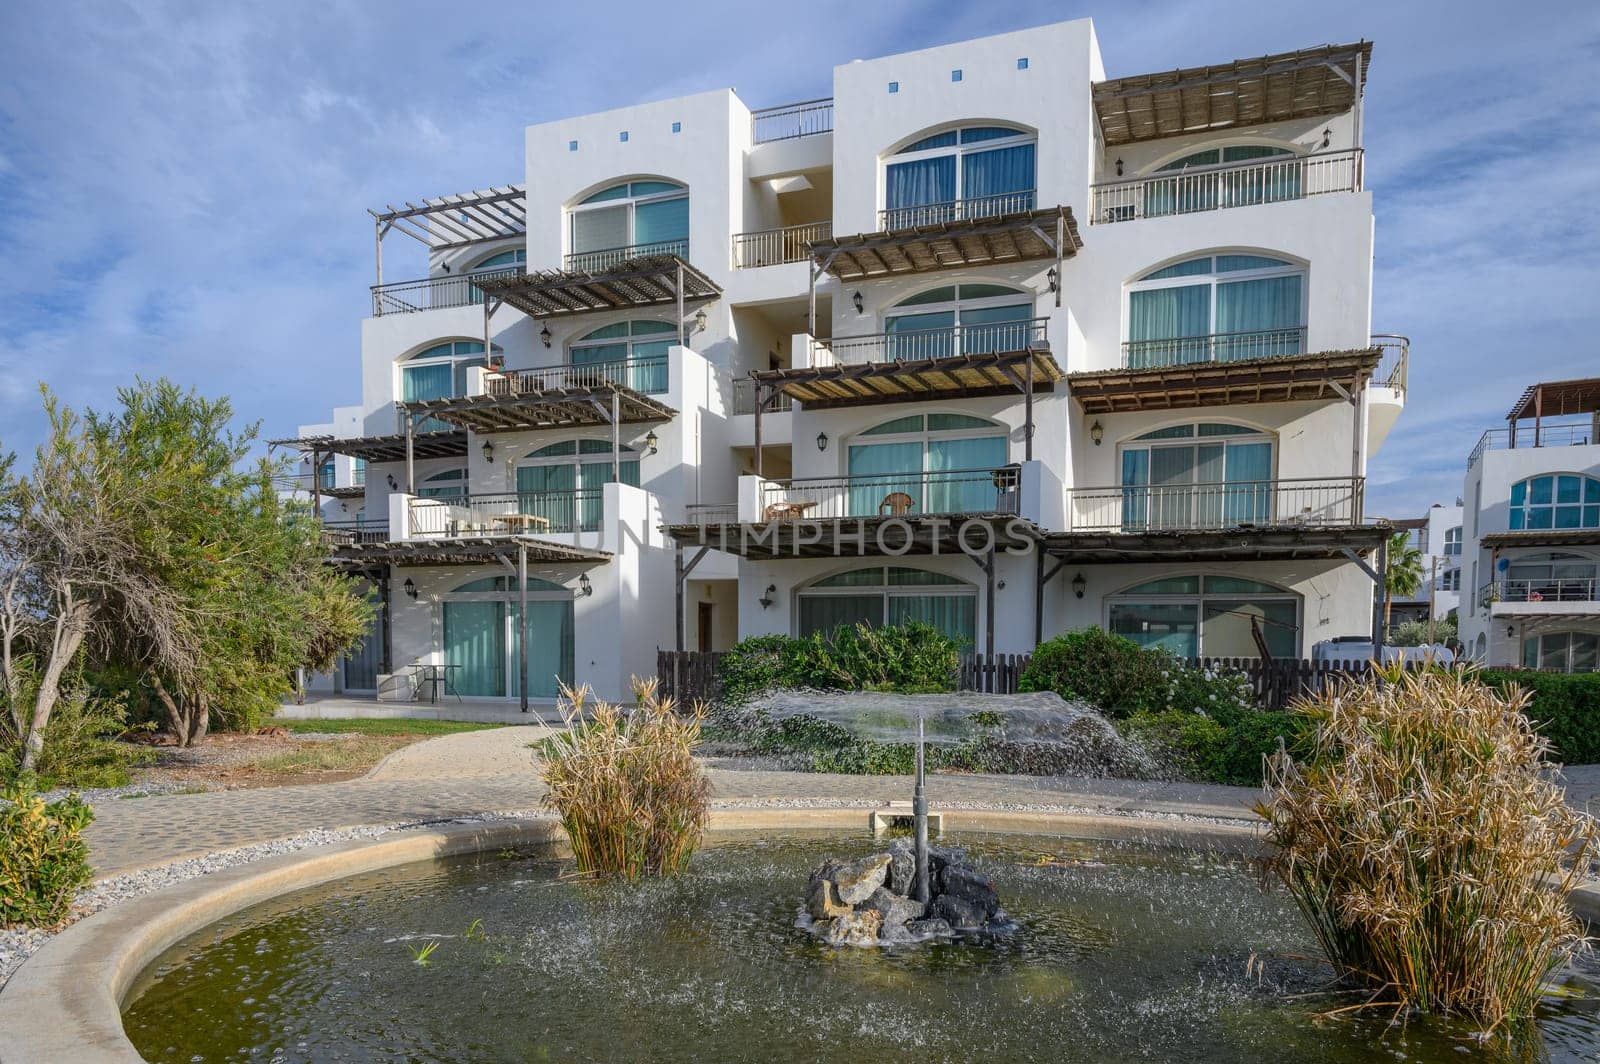 a fountain sprays water against the backdrop of a residential complex near the sea